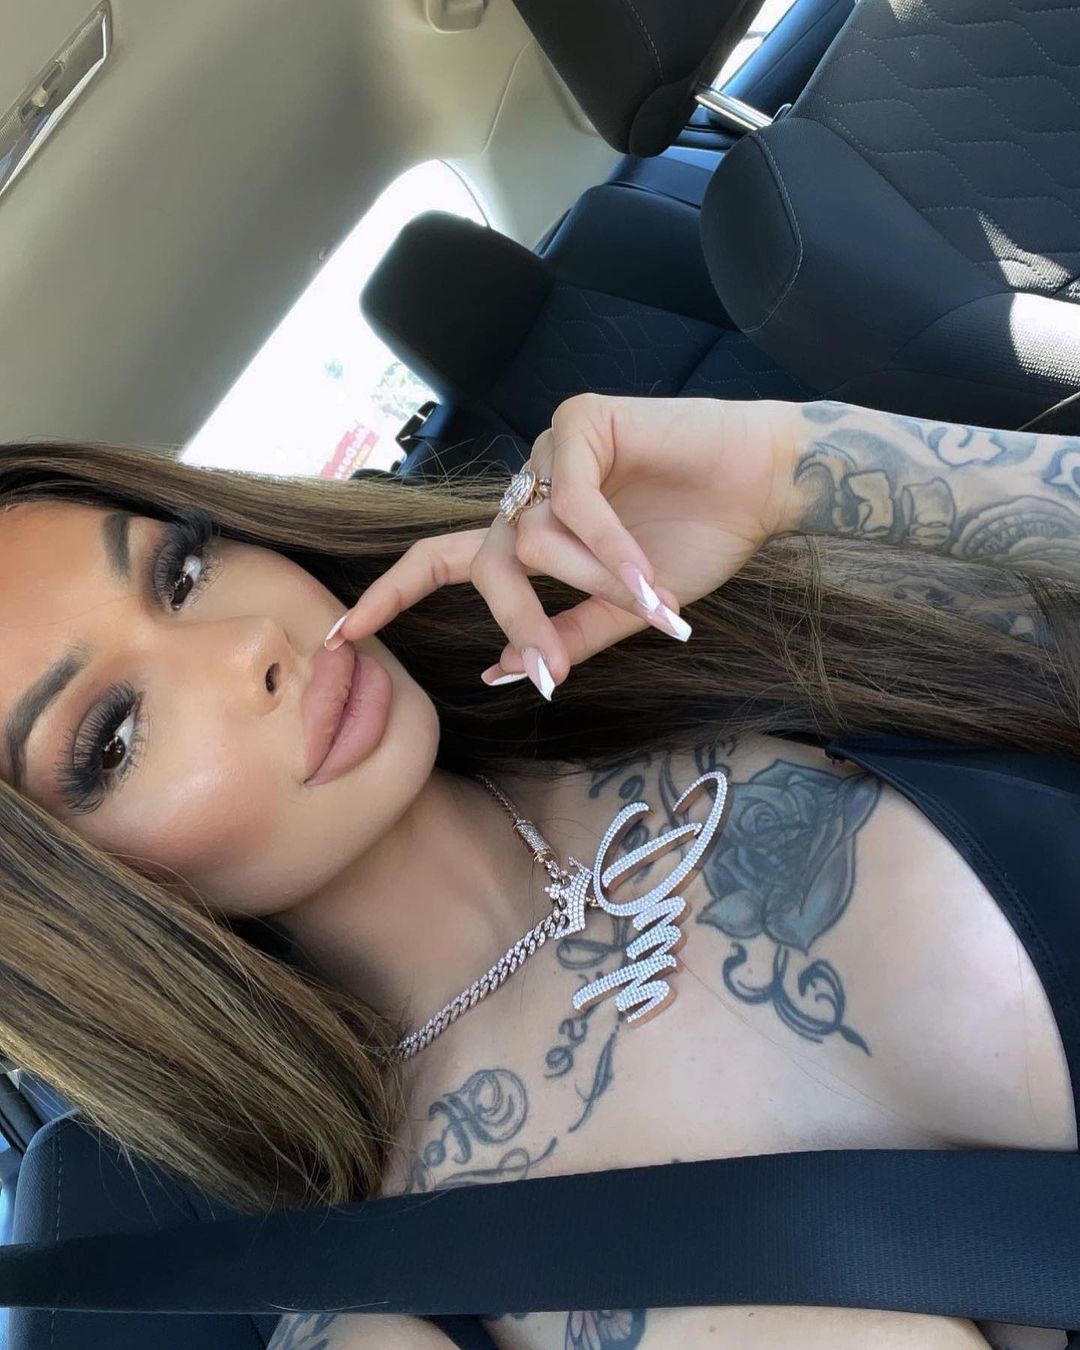 Onlyfans Model Celina Powell Is Hanging Out With Antonio Bro